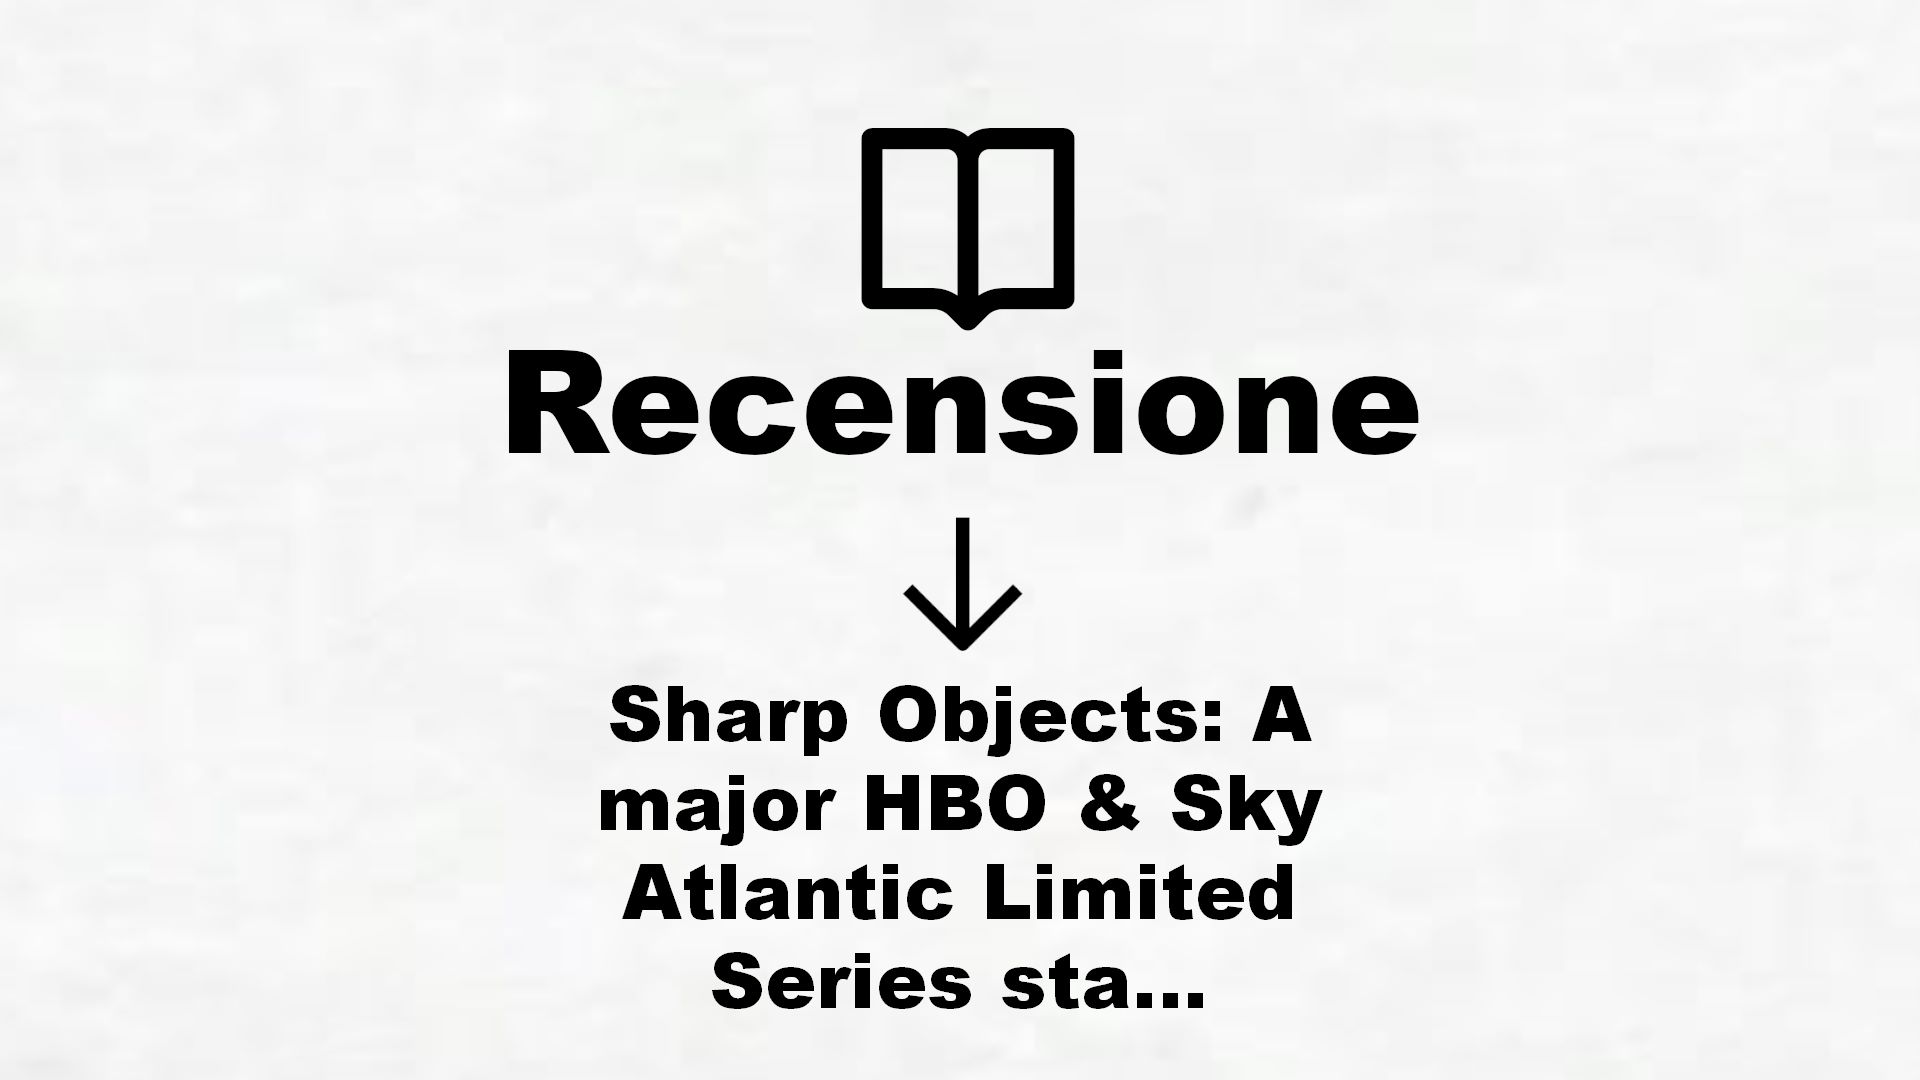 Sharp Objects: A major HBO & Sky Atlantic Limited Series starring Amy Adams, from the director of BIG LITTLE LIES, Jean-Marc Vallée – Recensione Libro